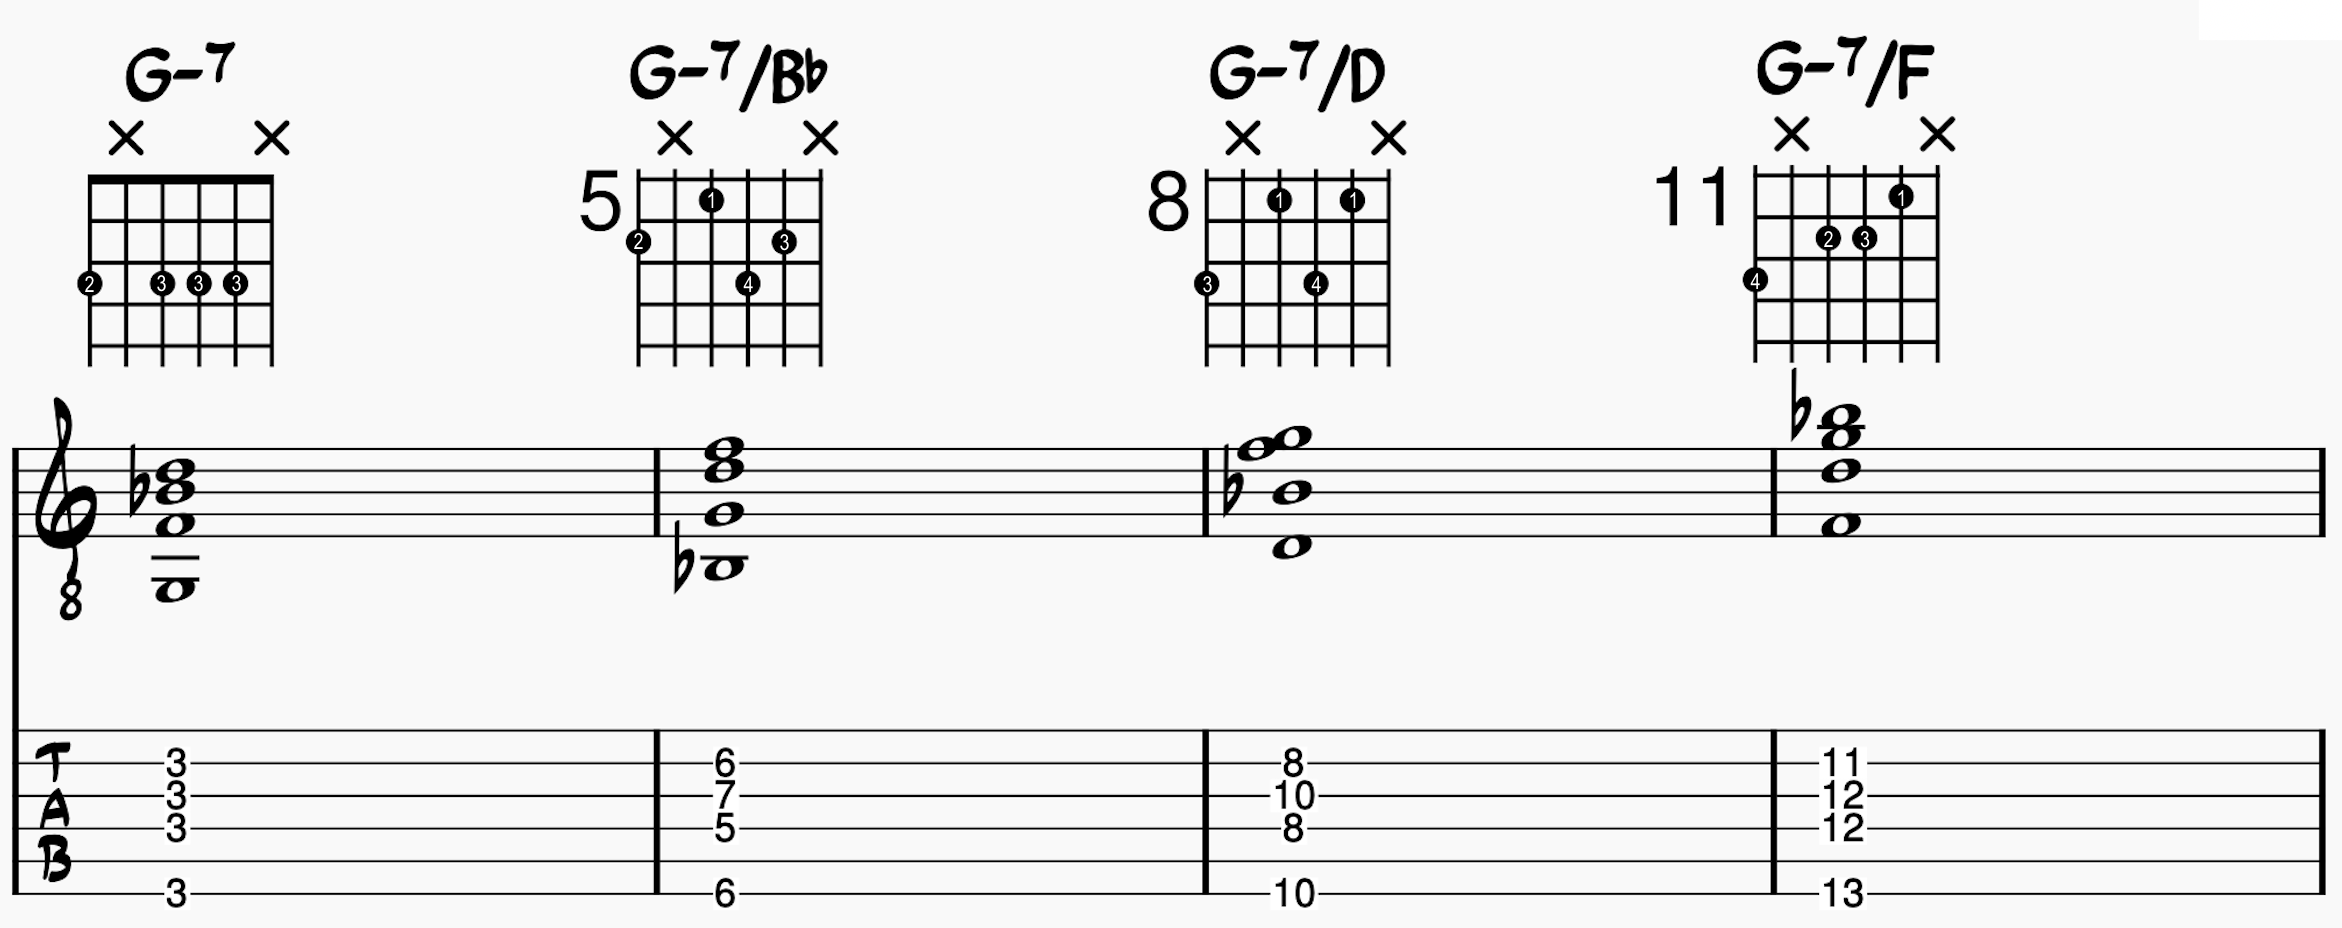 E-D-G-B String Group Minor Seven Chord All Inversions